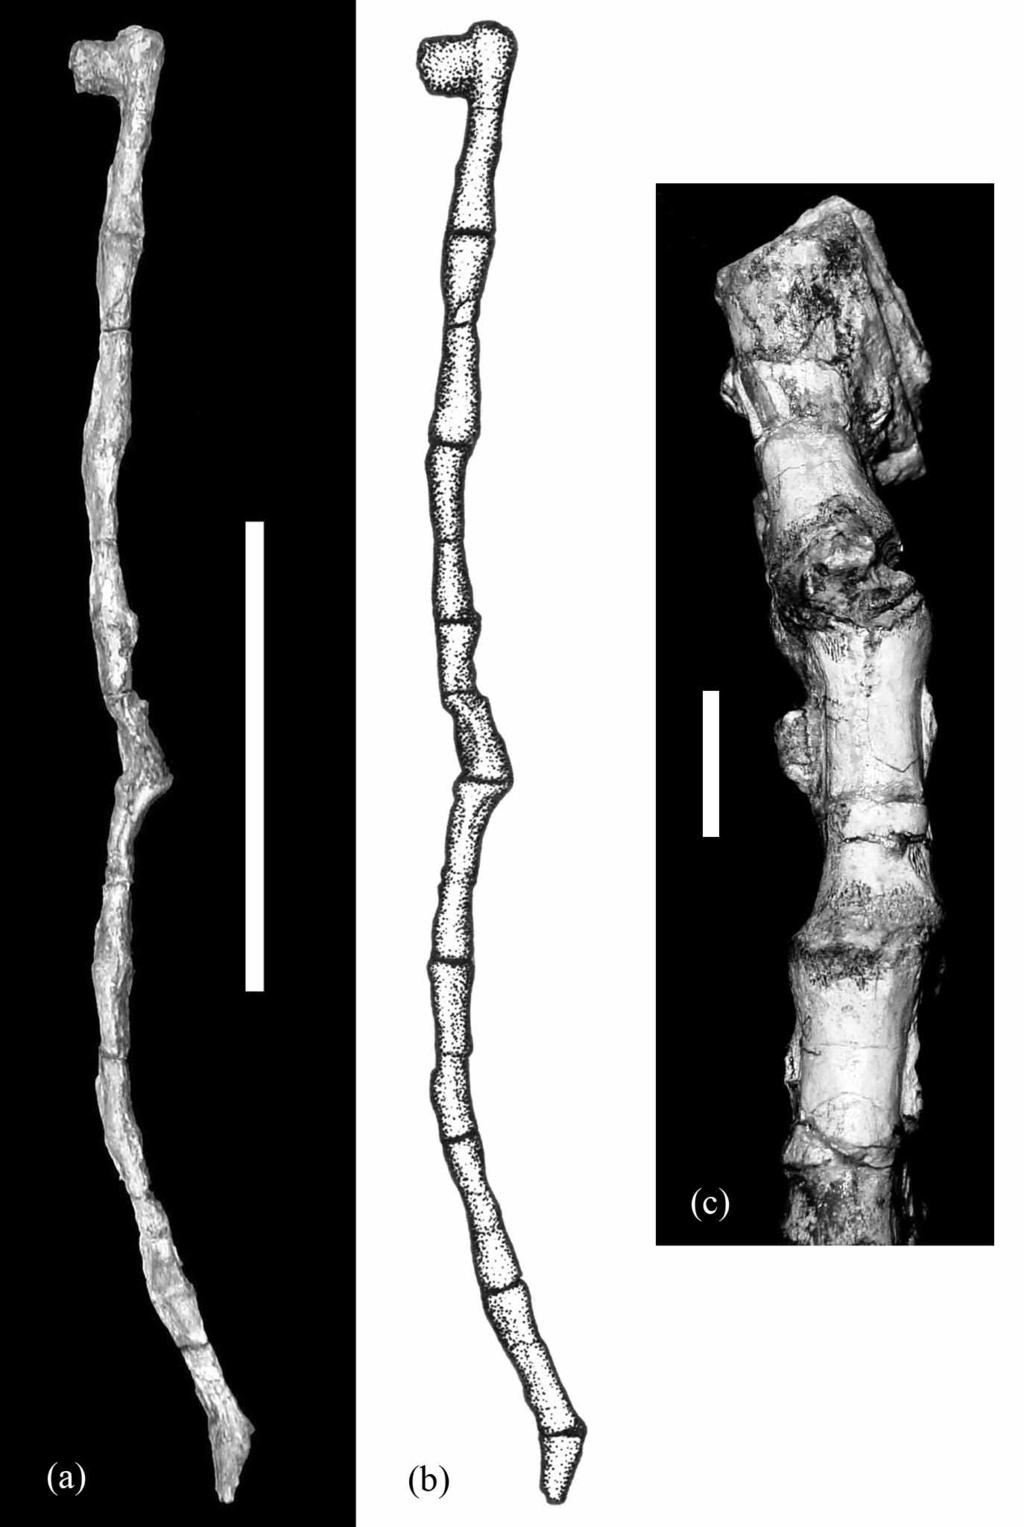 FIGURE 19. Photographs and drawings of distal caudal vertebrae in ventral view, sequence 5 (a b) and detail of the caudal vertebrae of sequence 3 (c). Scale bar for (a b) = 6 cm; (c) = 2 cm.